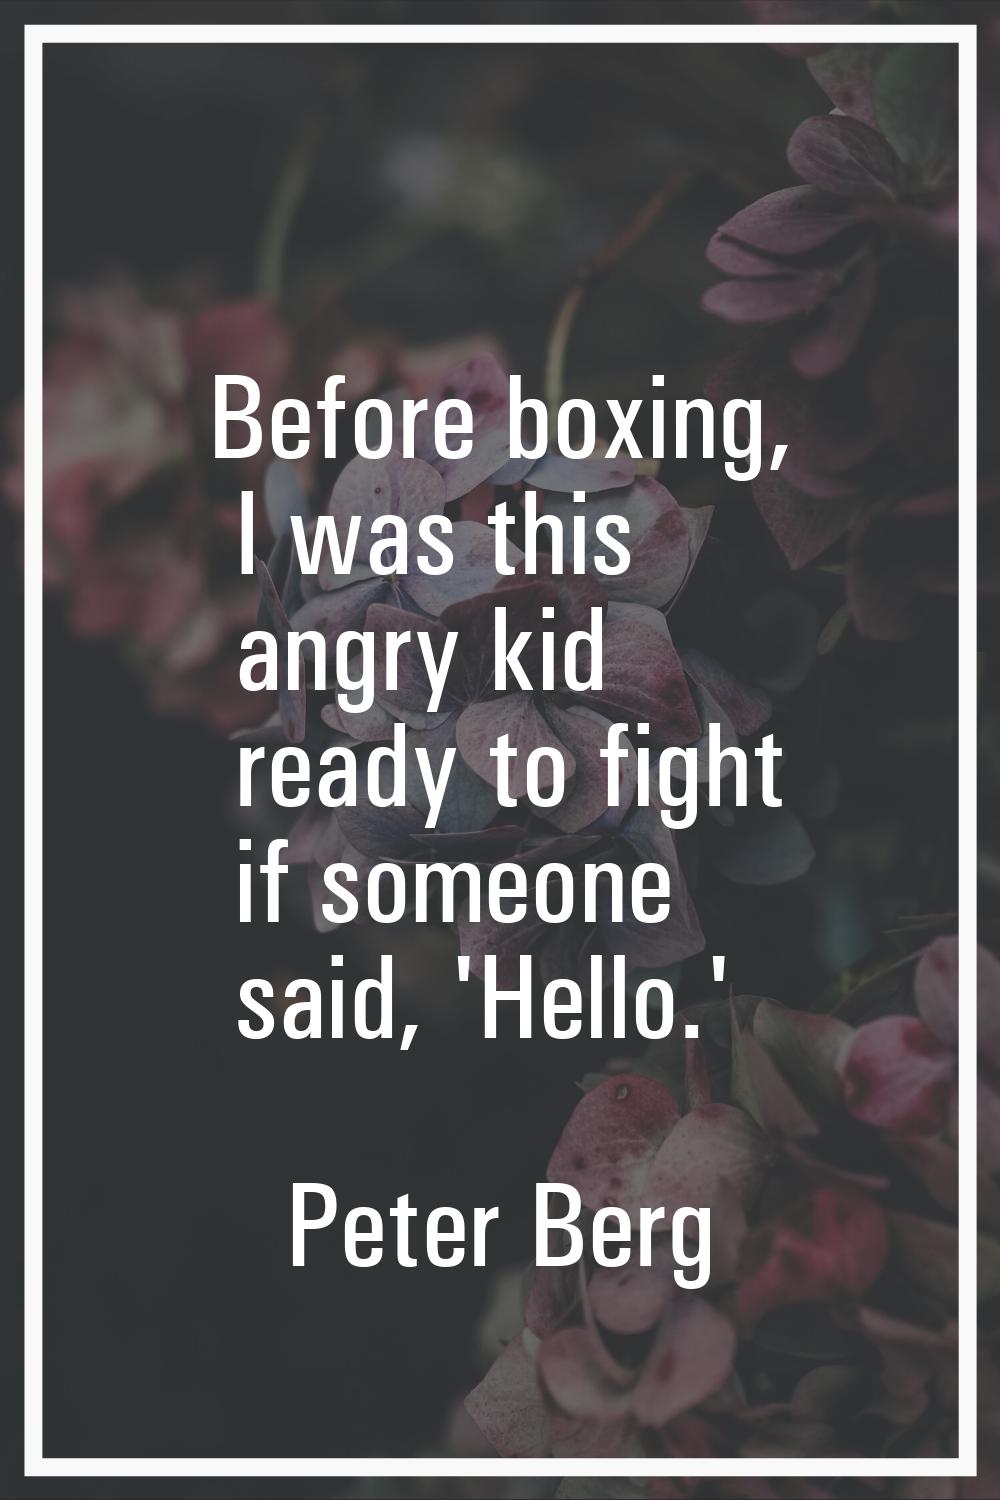 Before boxing, I was this angry kid ready to fight if someone said, 'Hello.'